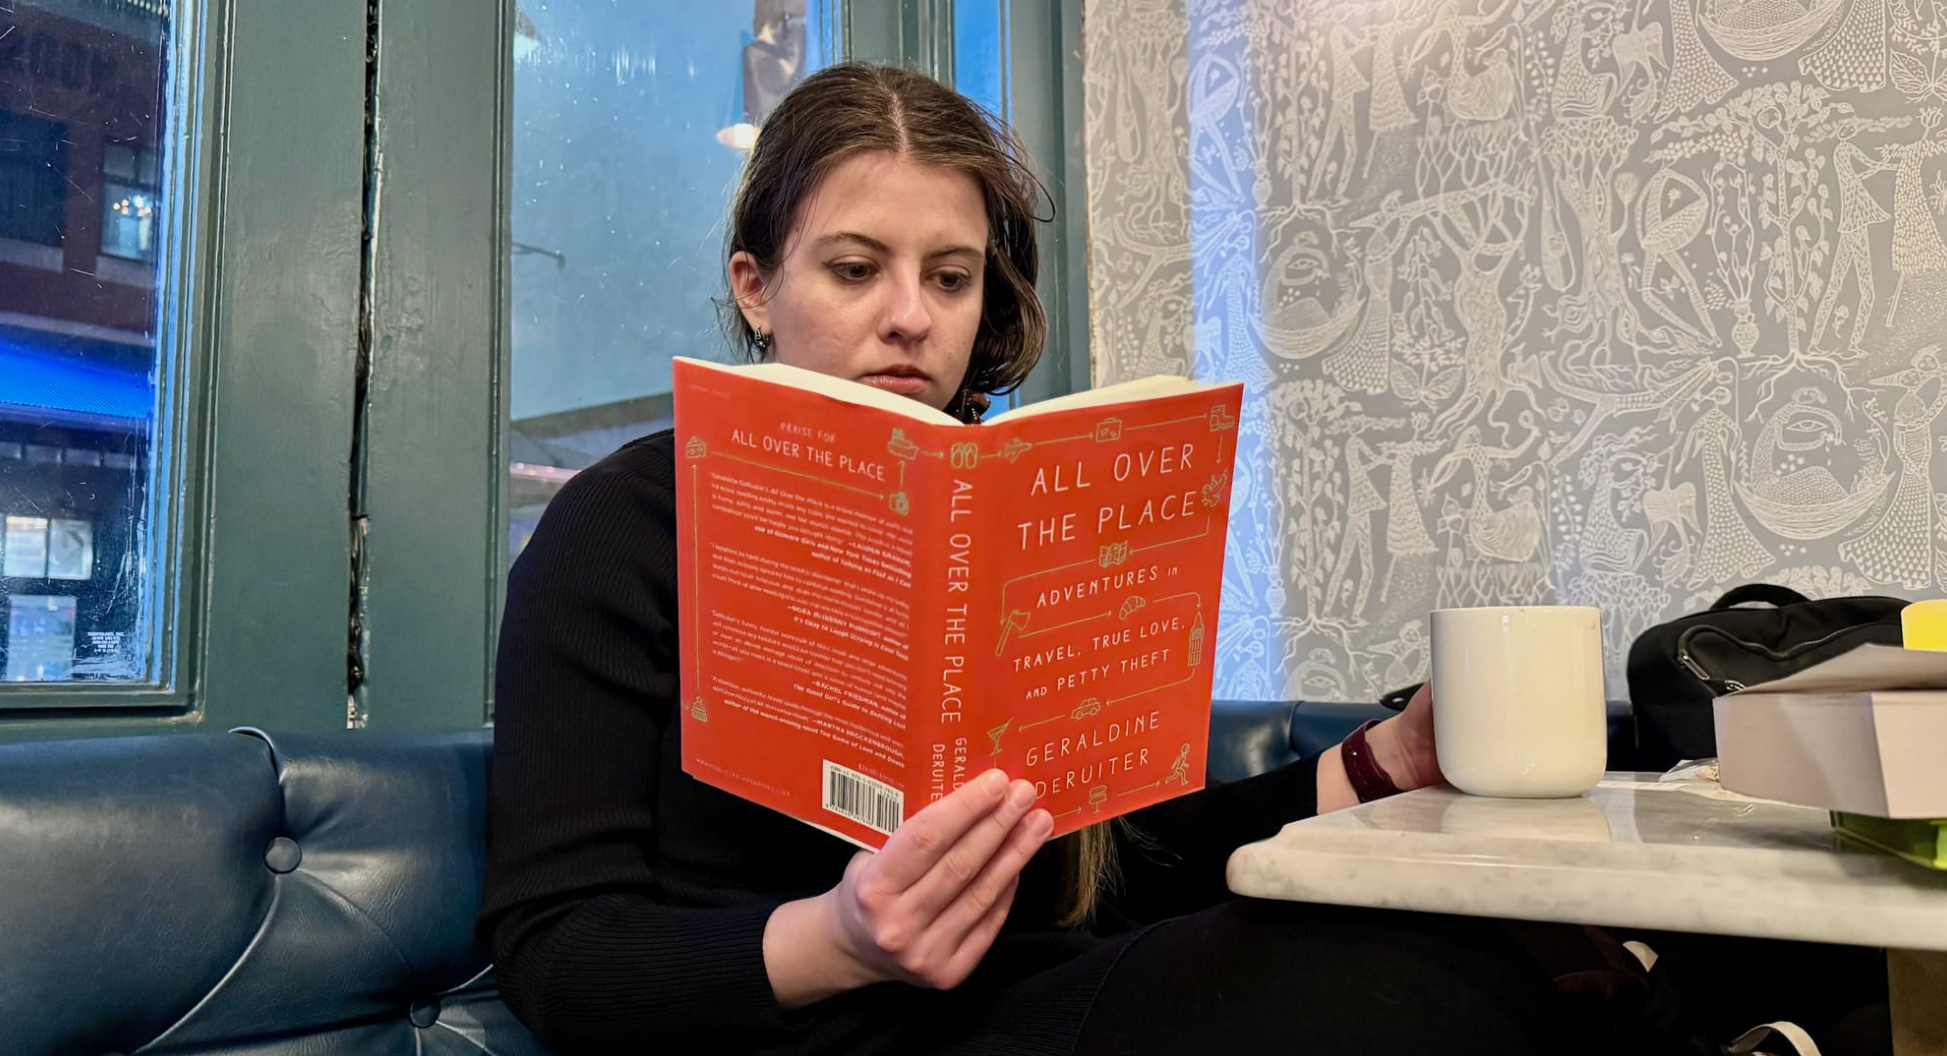 A photo of a white woman, Mariya Delano, sitting in a cafe holding a copy of "All Over The Place" by Geraldine DeRuiter.